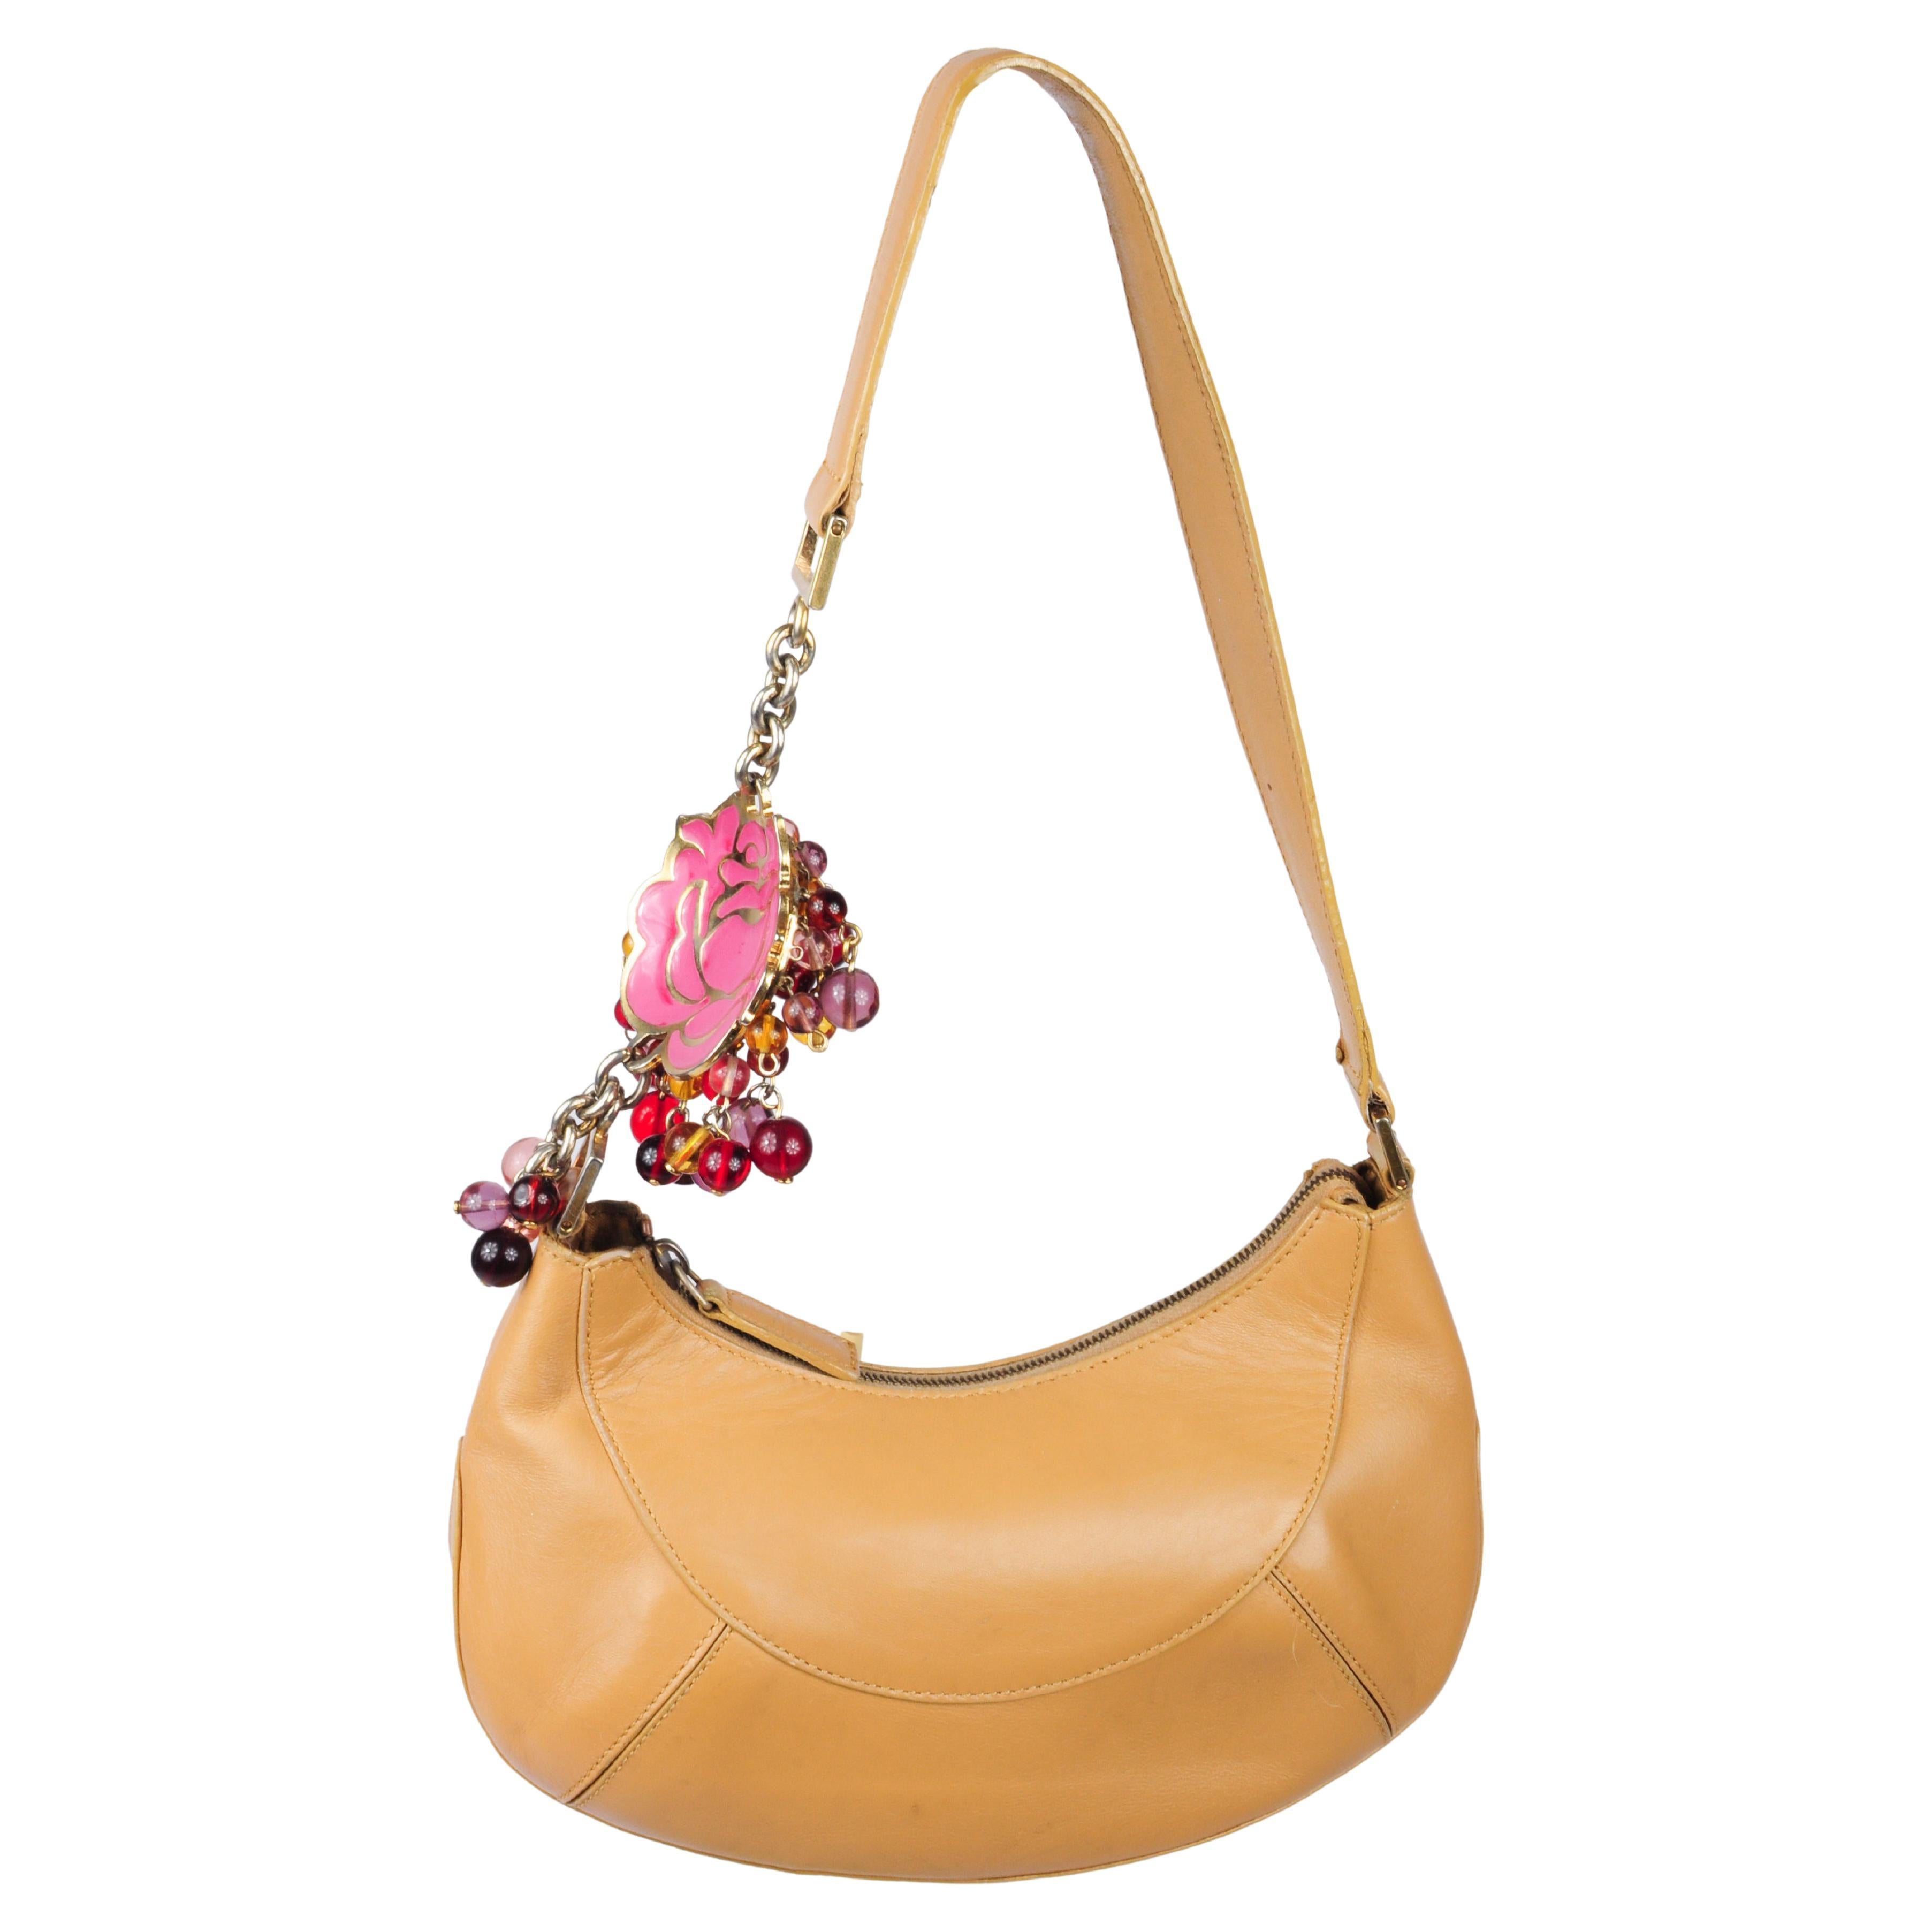 Gianni Versace Mini Shoulder Bag with Camellia Flower Glass